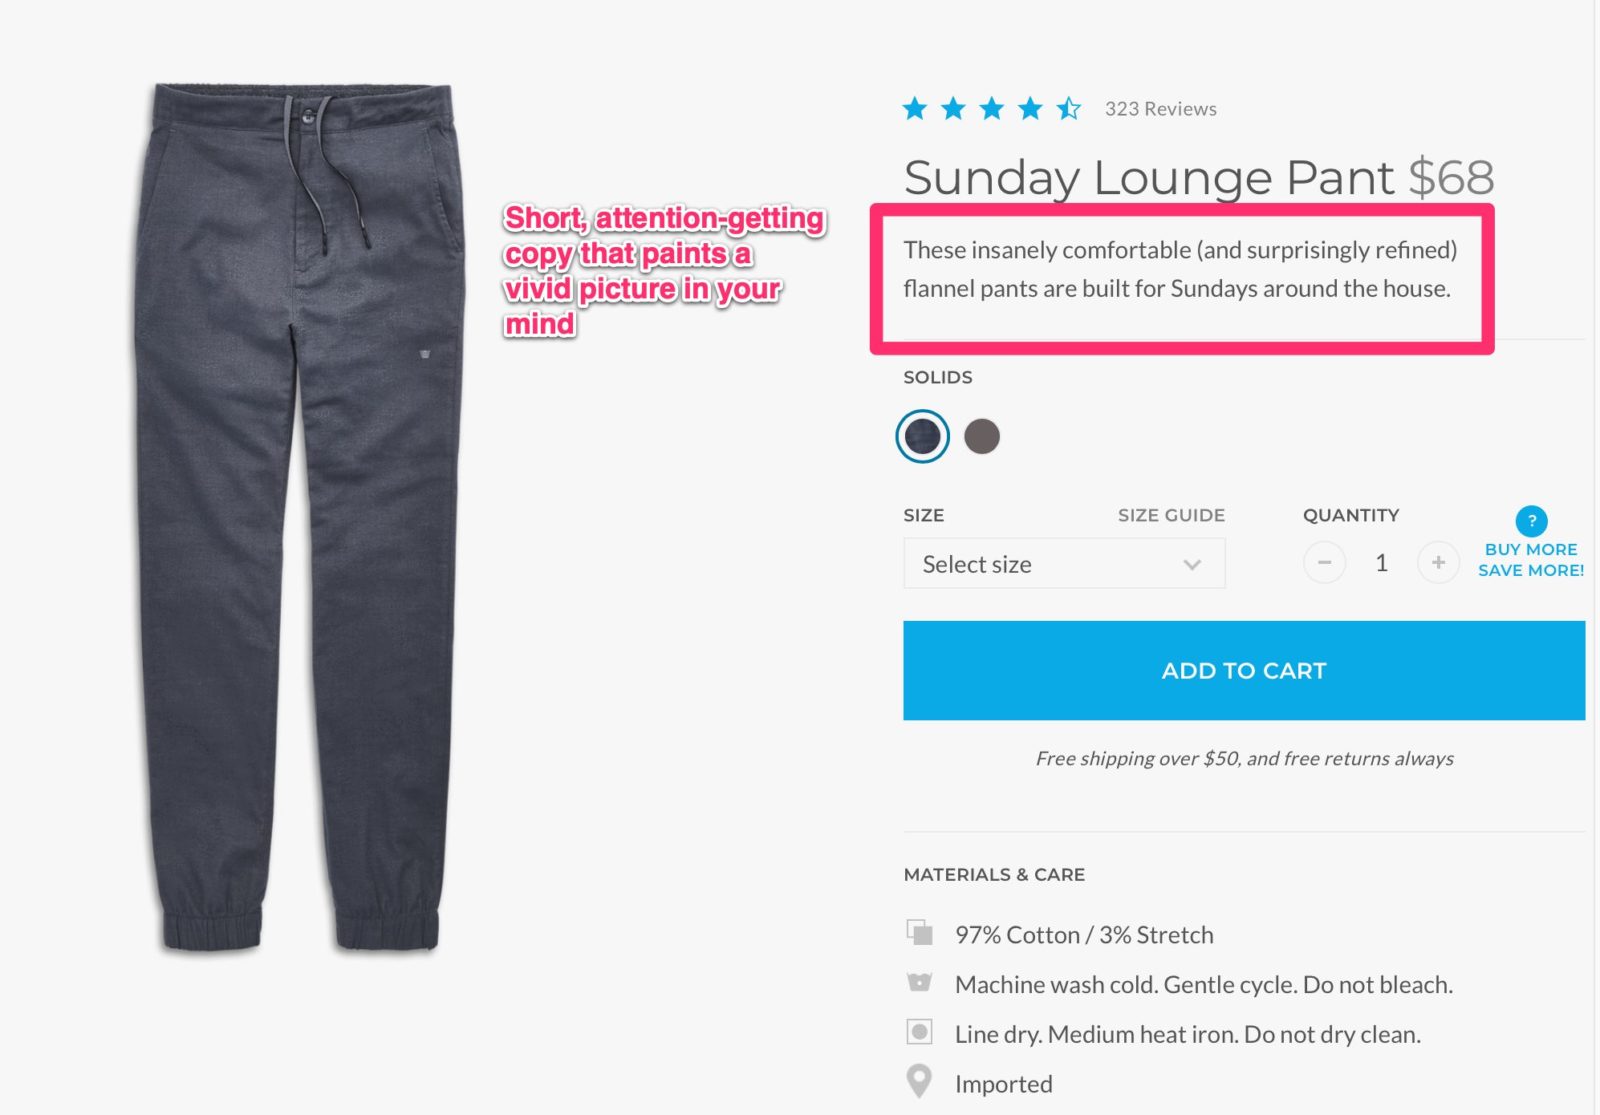 20 Reasons Why You Need Unique Product Descriptions - Growth Hacking ...